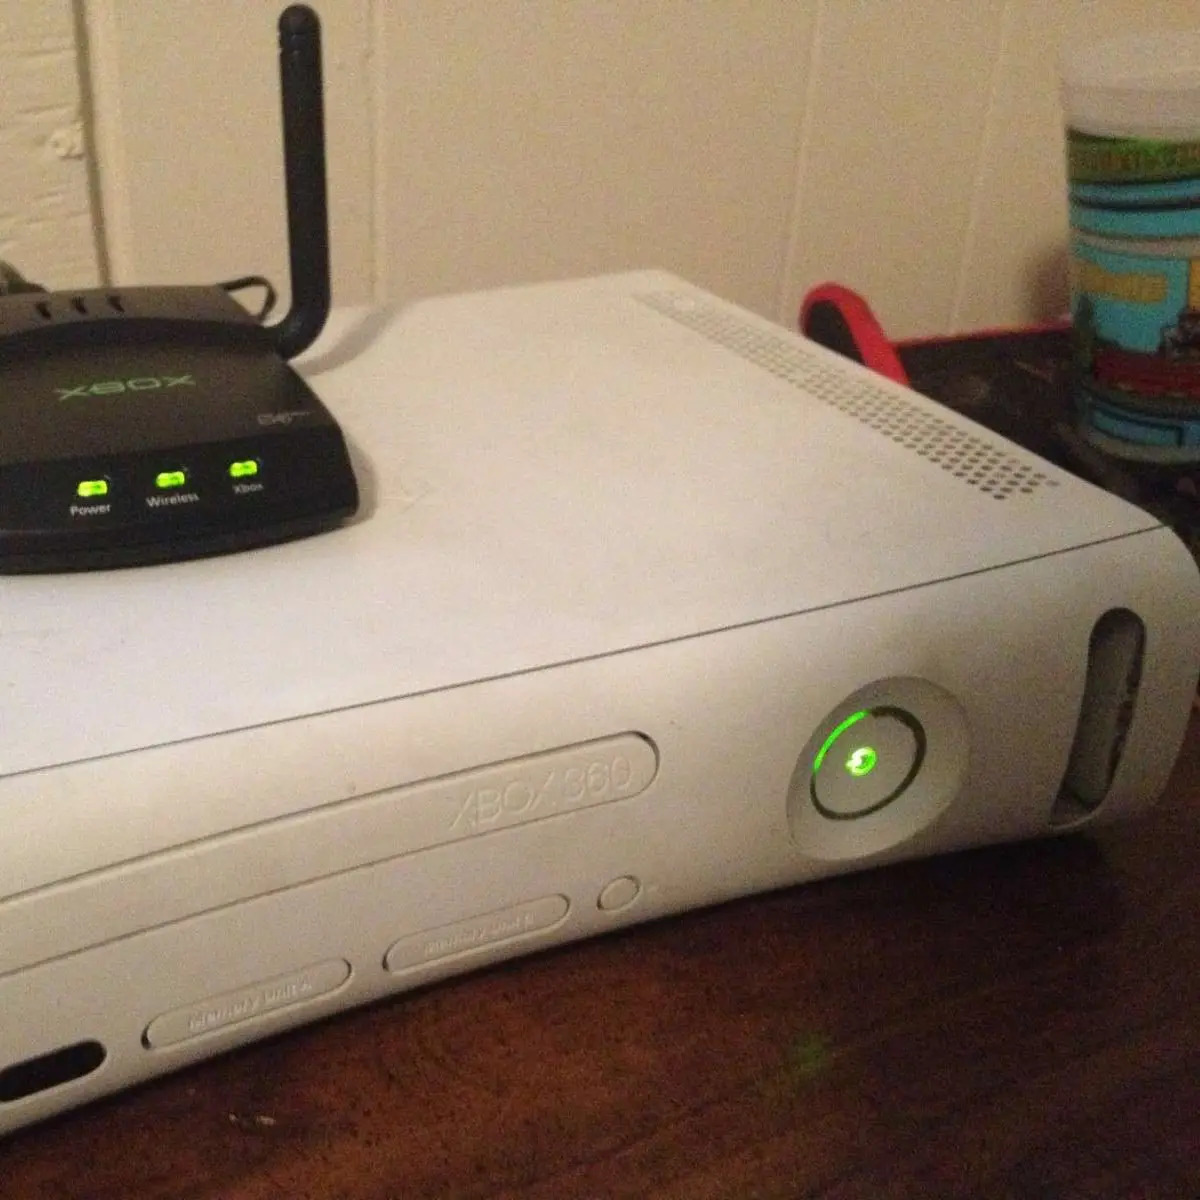 Connecting Xbox 360 To Hotspot: Step-by-Step Guide